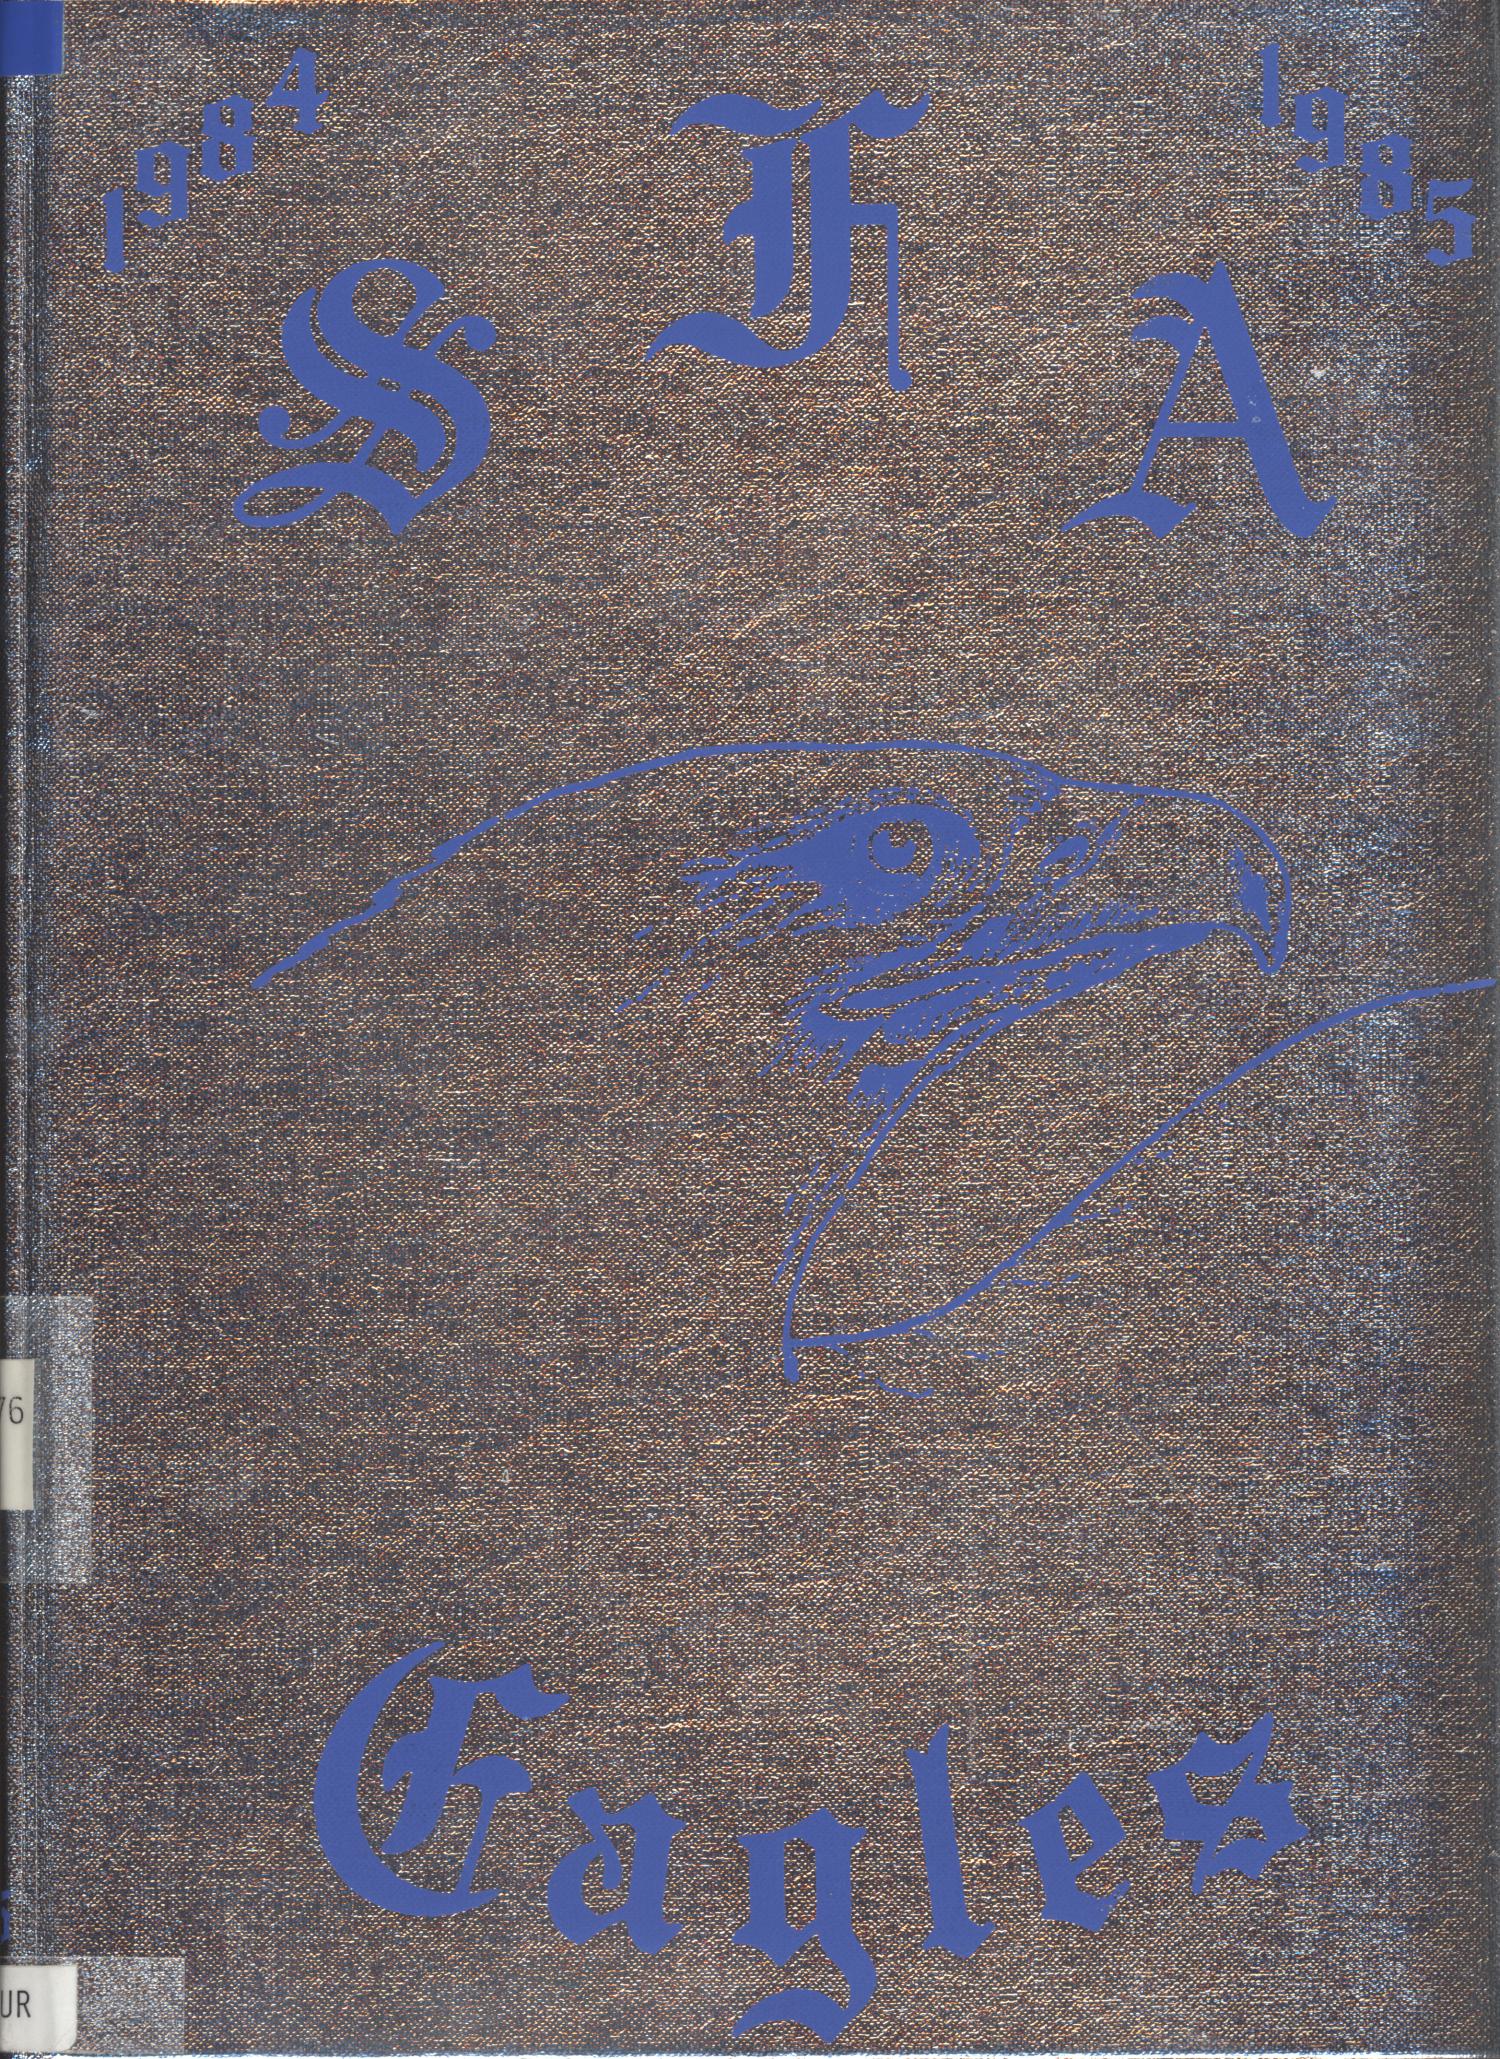 The Eagle, Yearbook of Stephen F. Austin High School, 1985
                                                
                                                    Front Cover
                                                